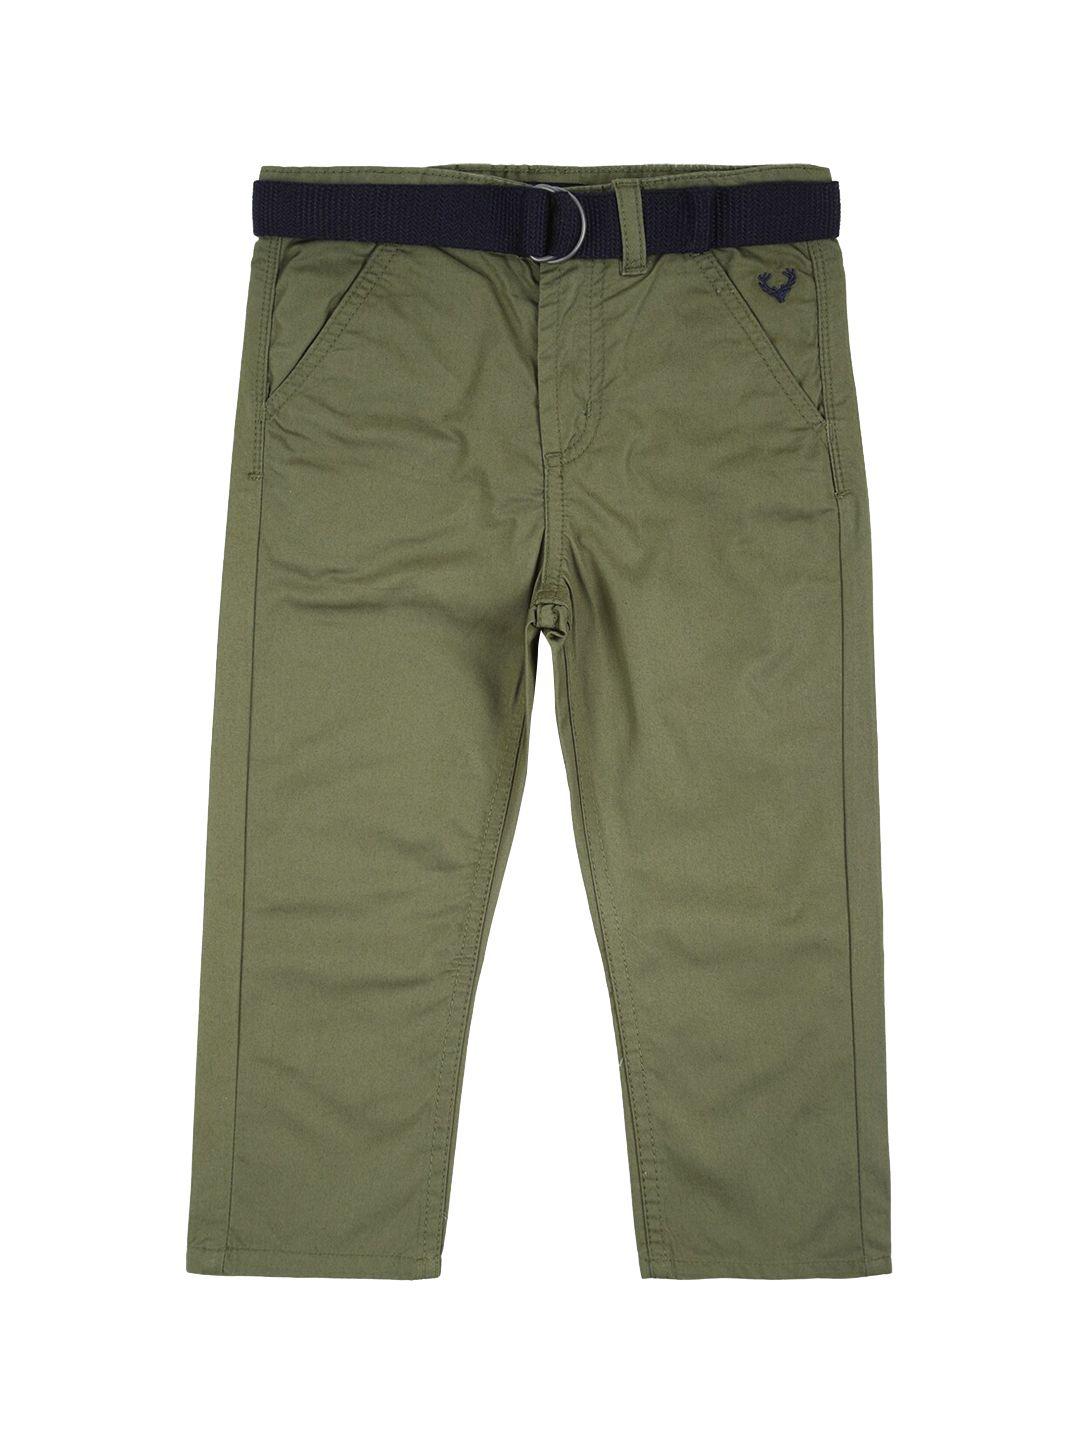 allen-solly-junior-boys-olive-green-slim-fit-trousers